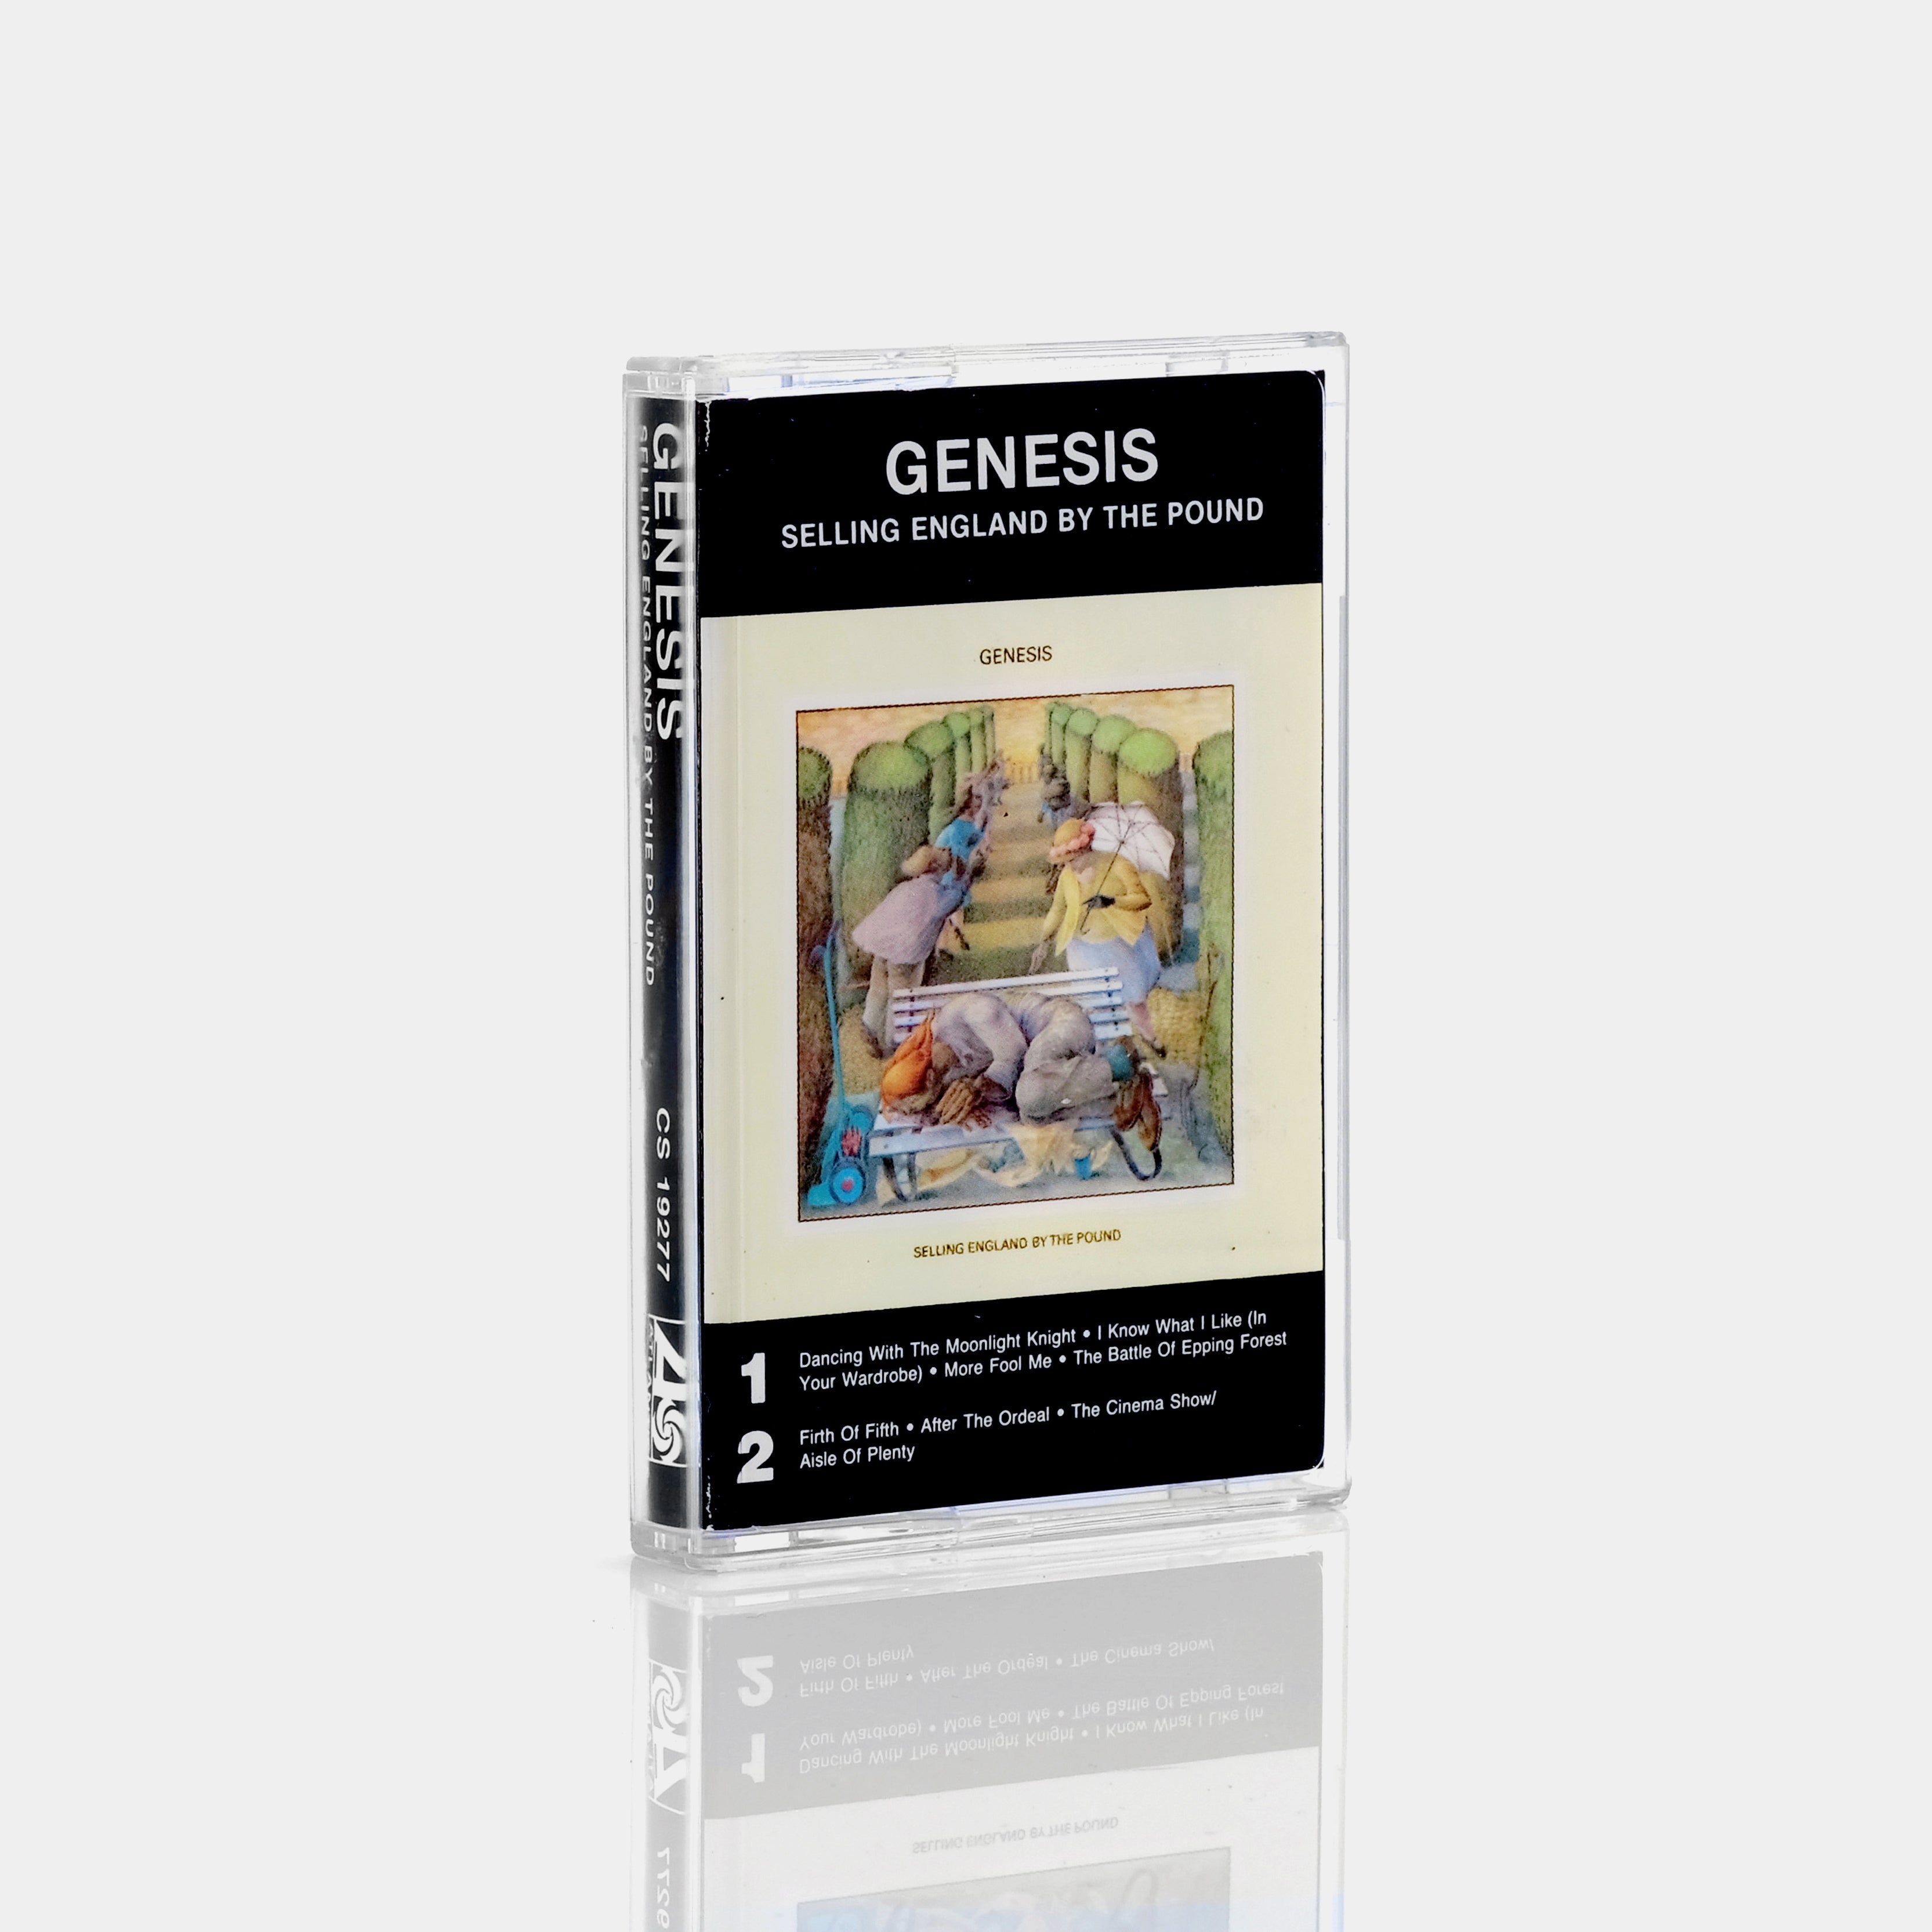 Genesis - Selling England By The Pound Cassette Tape